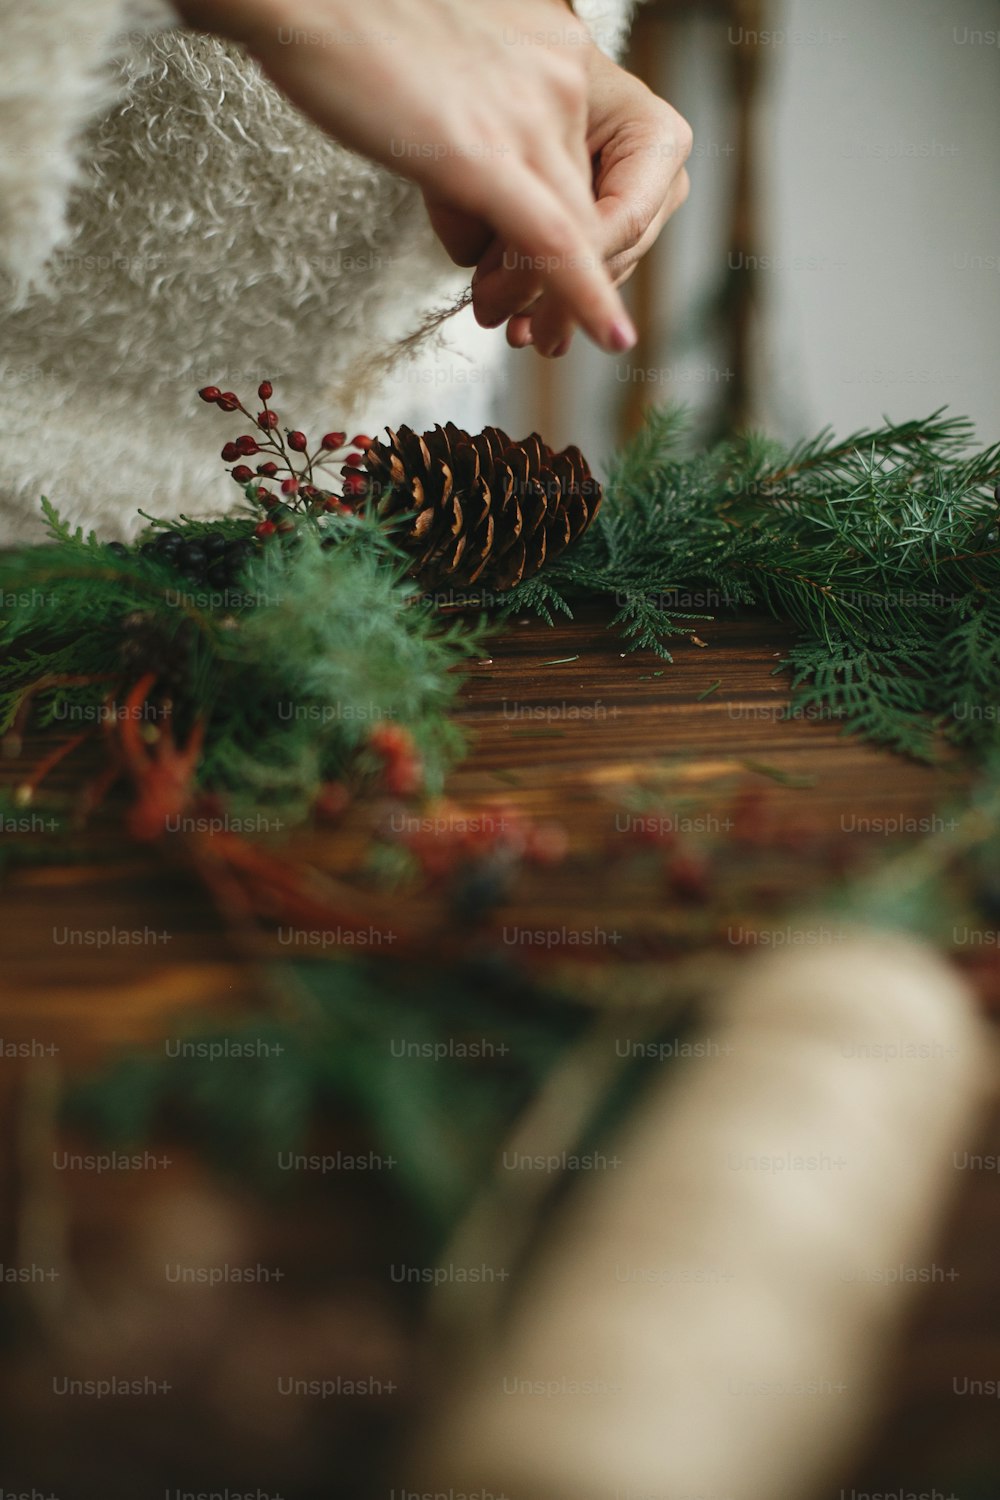 Making stylish rustic christmas wreath. Hands holding berries and decorating natural wreath on rustic wooden background. Seasonal holiday workshop or making wreath at home